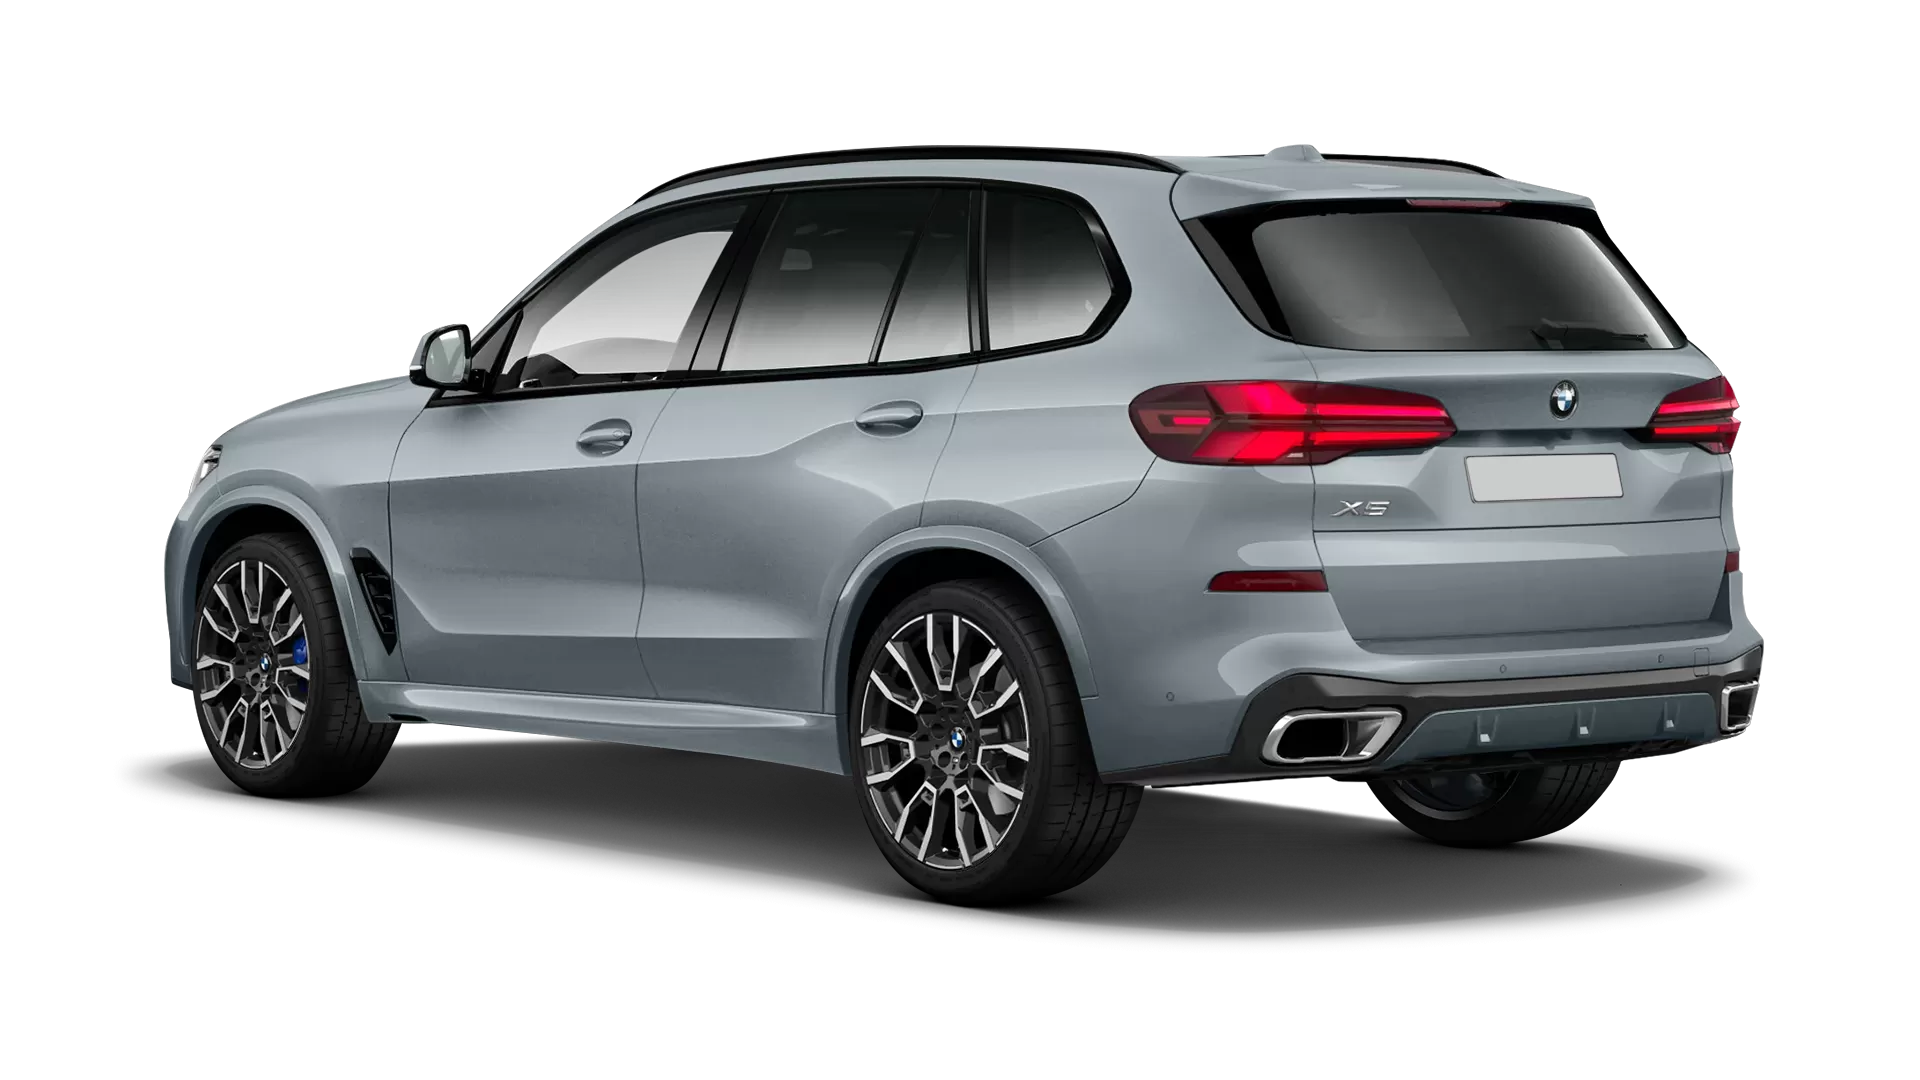 BMW X5 G05 LCI Facelift stock rear view in Frozen Pure Grey color